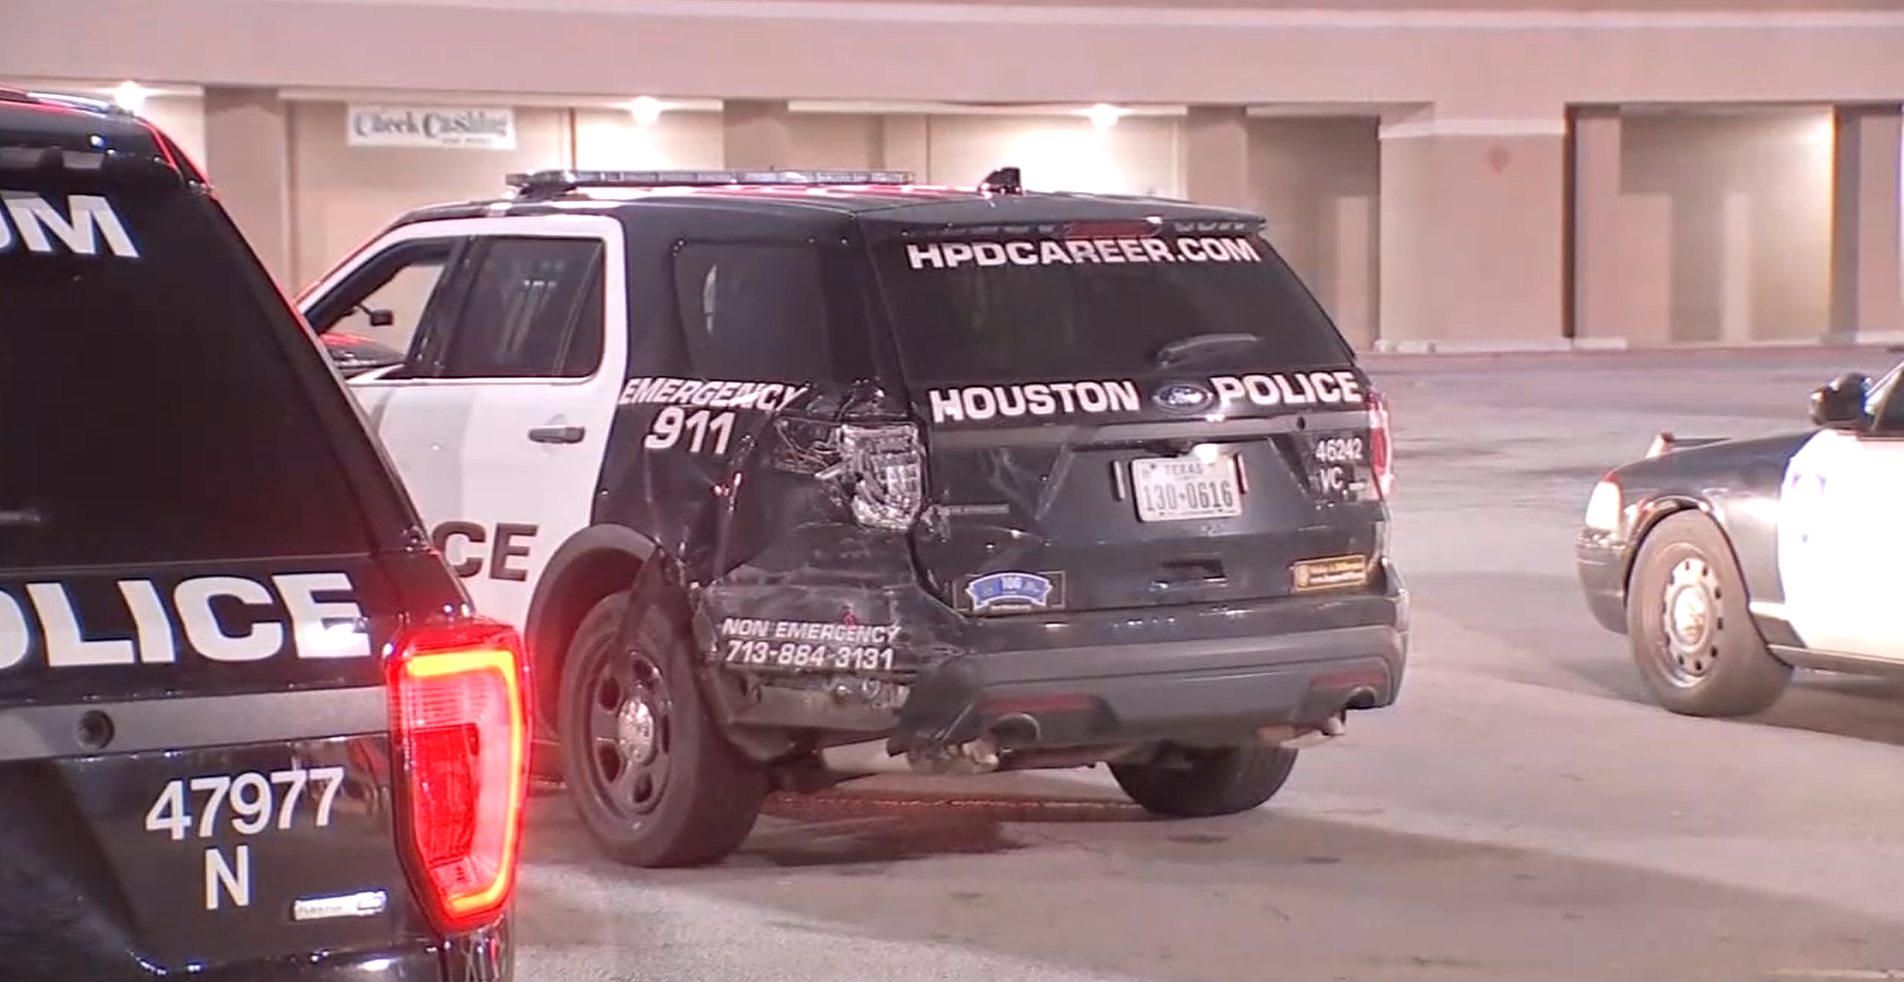 3.21.22_ACCIDENTNEWS_Sugar Land Officer and Two Others Injured in Series of Crashes_Photo